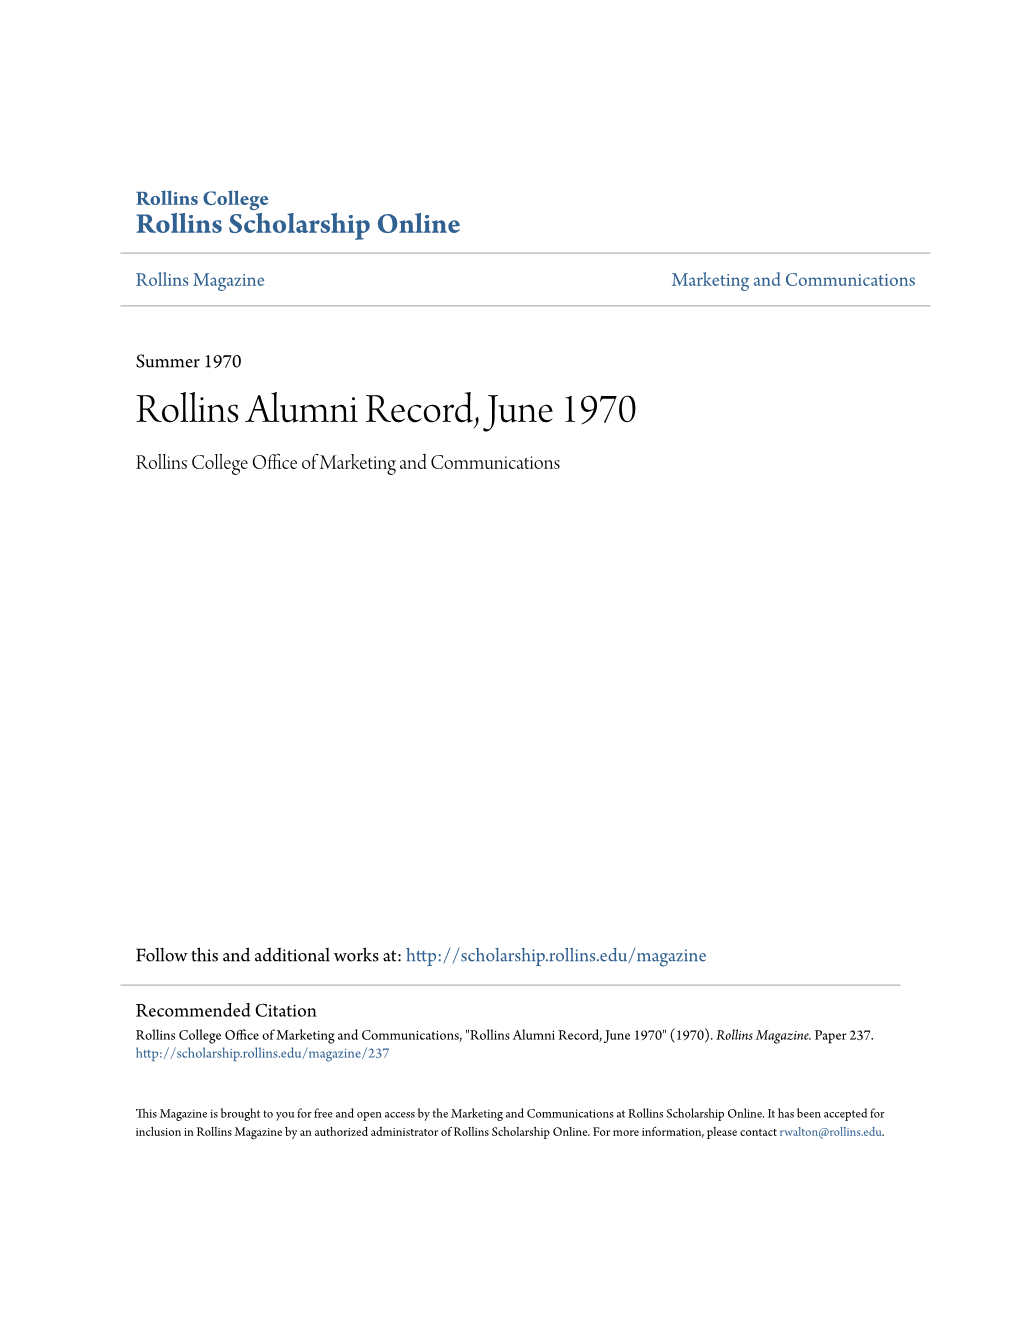 Rollins Alumni Record, June 1970 Rollins College Office Ofa M Rketing and Communications